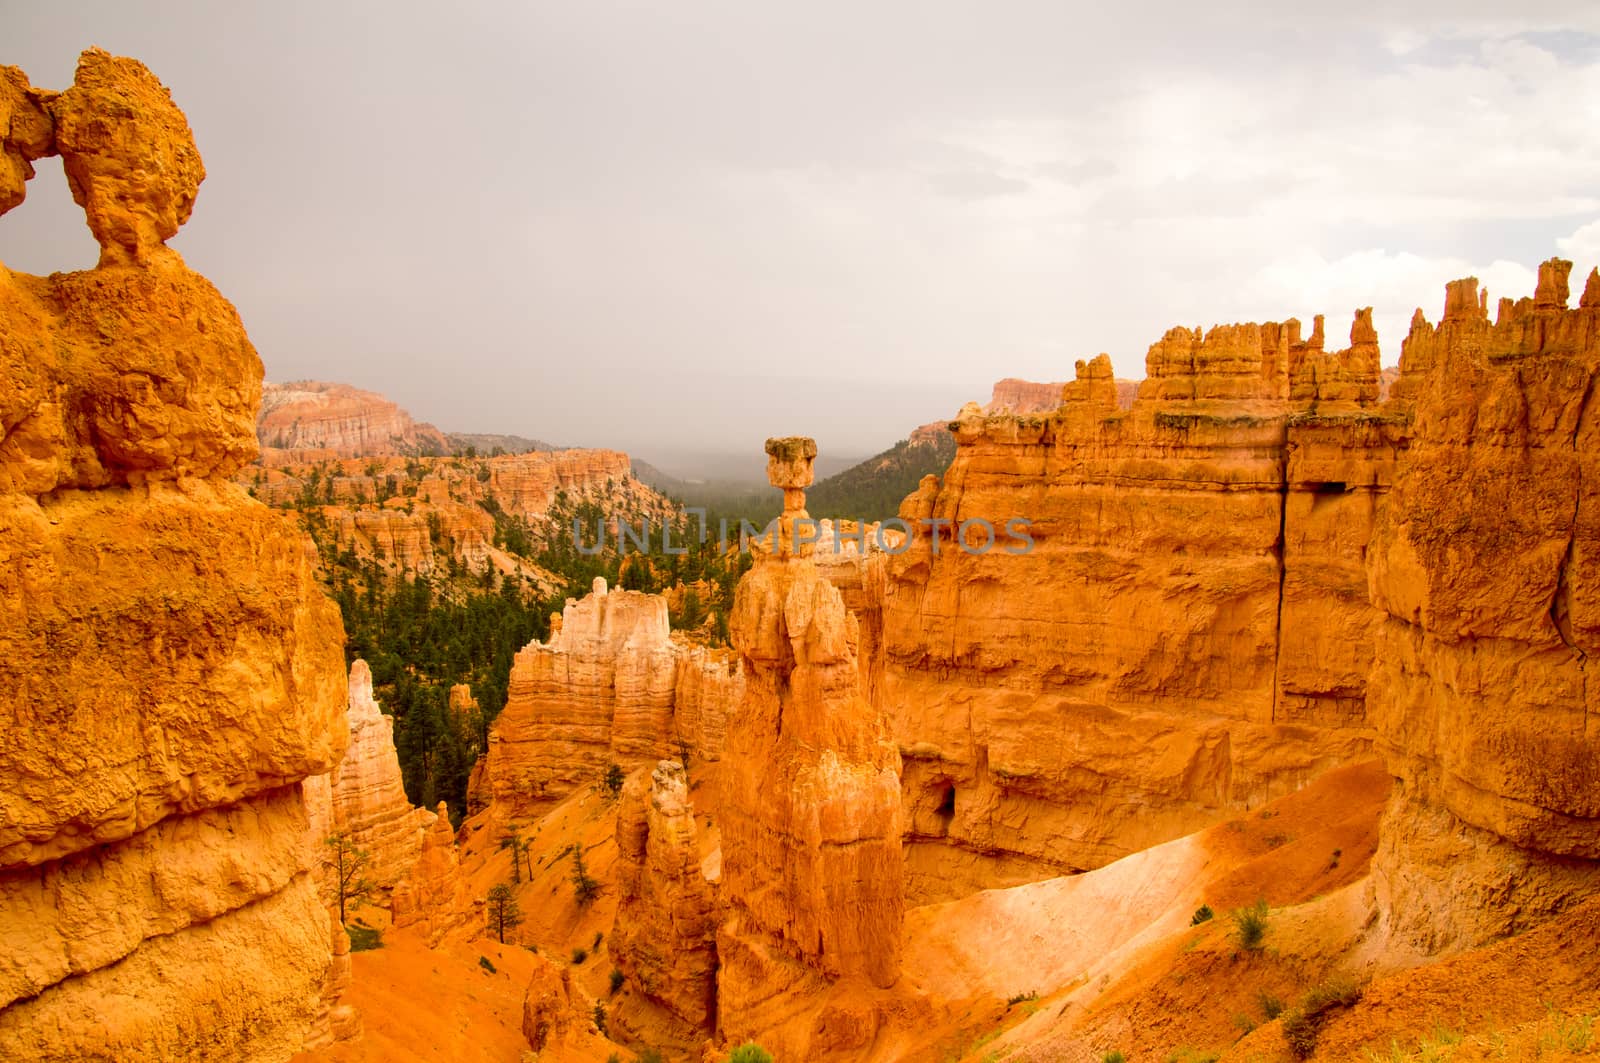 Summer rain storm in Bryce Canyon National Park by emattil